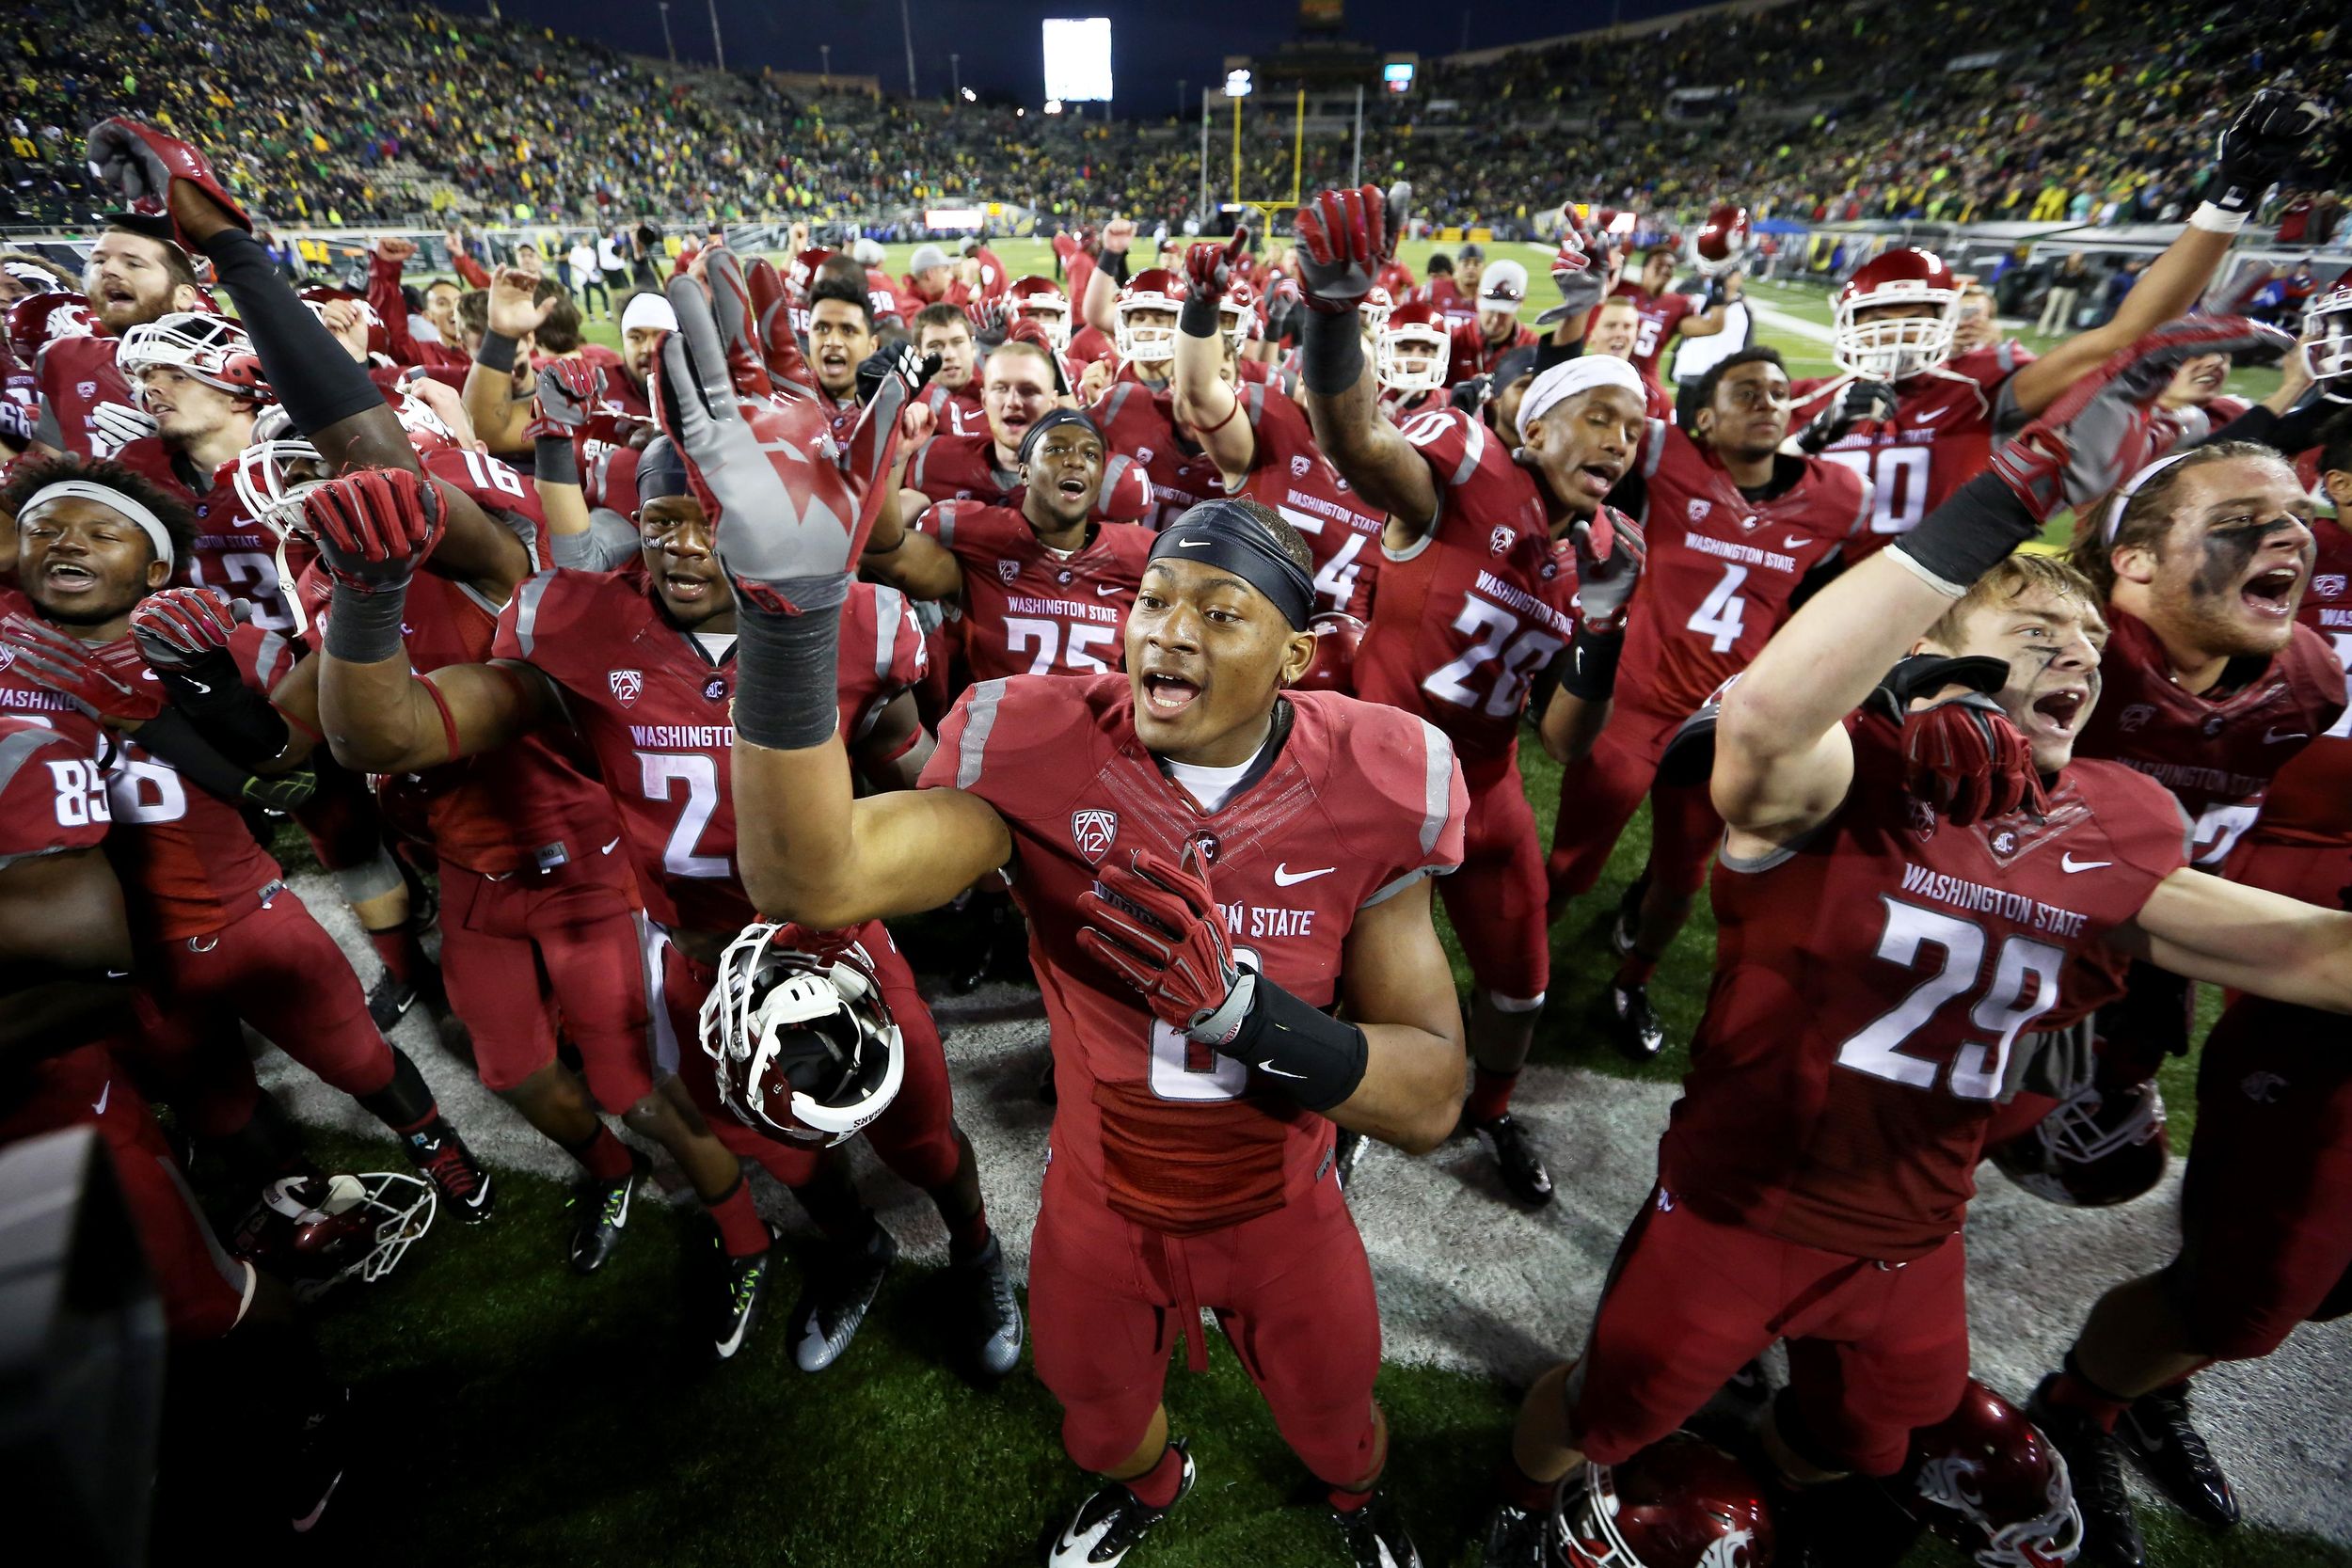 Oddly enough, No. 11 Washington State dying to leave Pullman for first